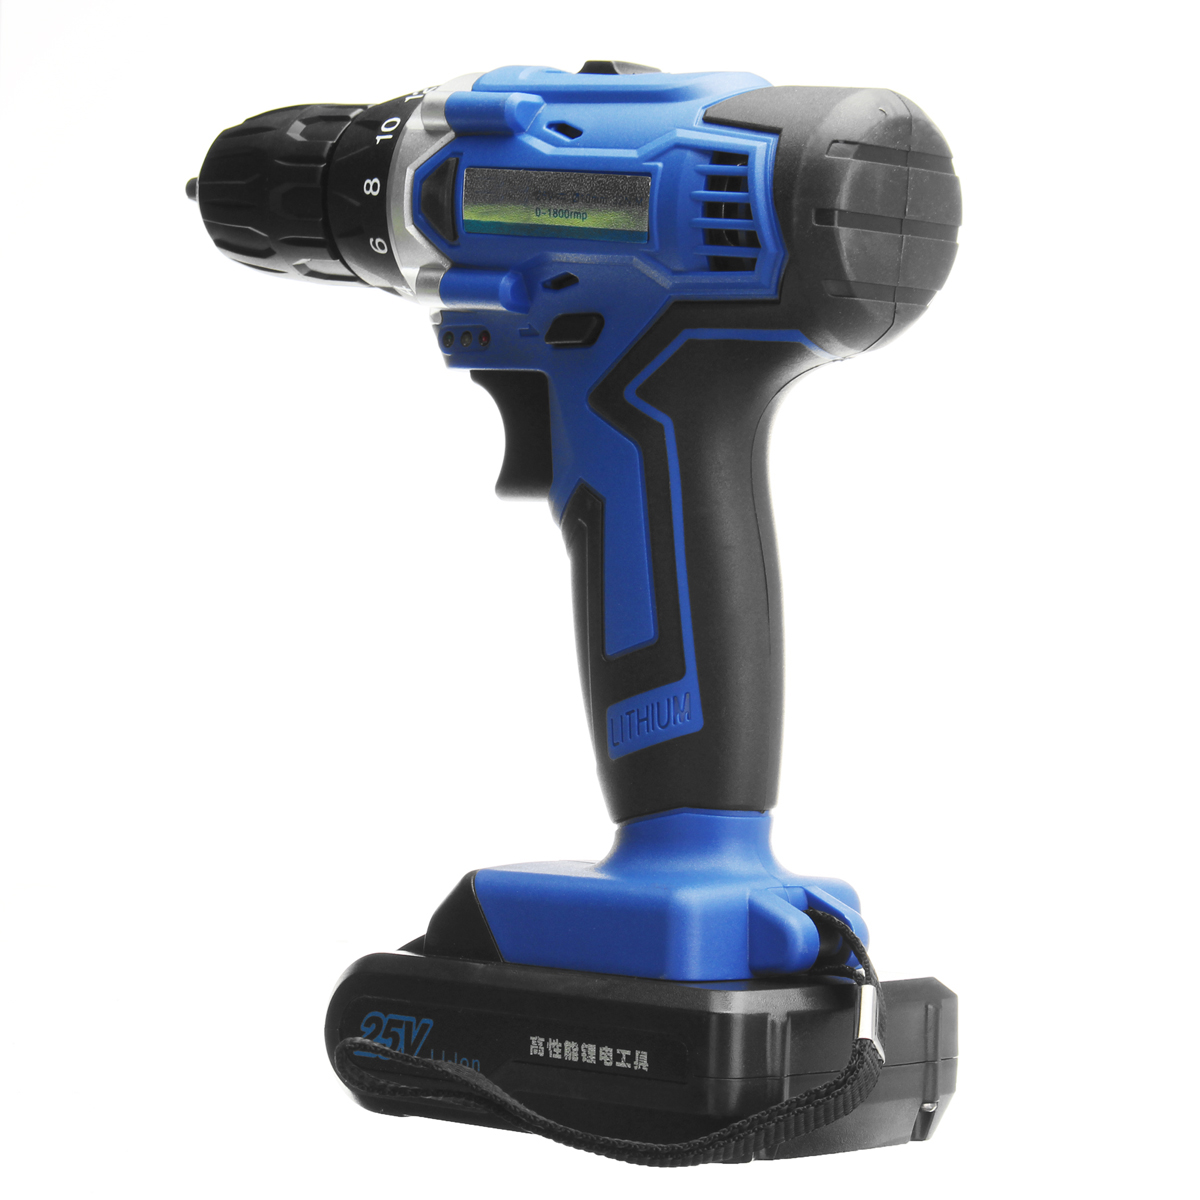 25V-Rechargeable-Cordless-Drill-Lithium-Ion-Power-Screwdriver-With-2-Batteries-1-Charger-1280262-6